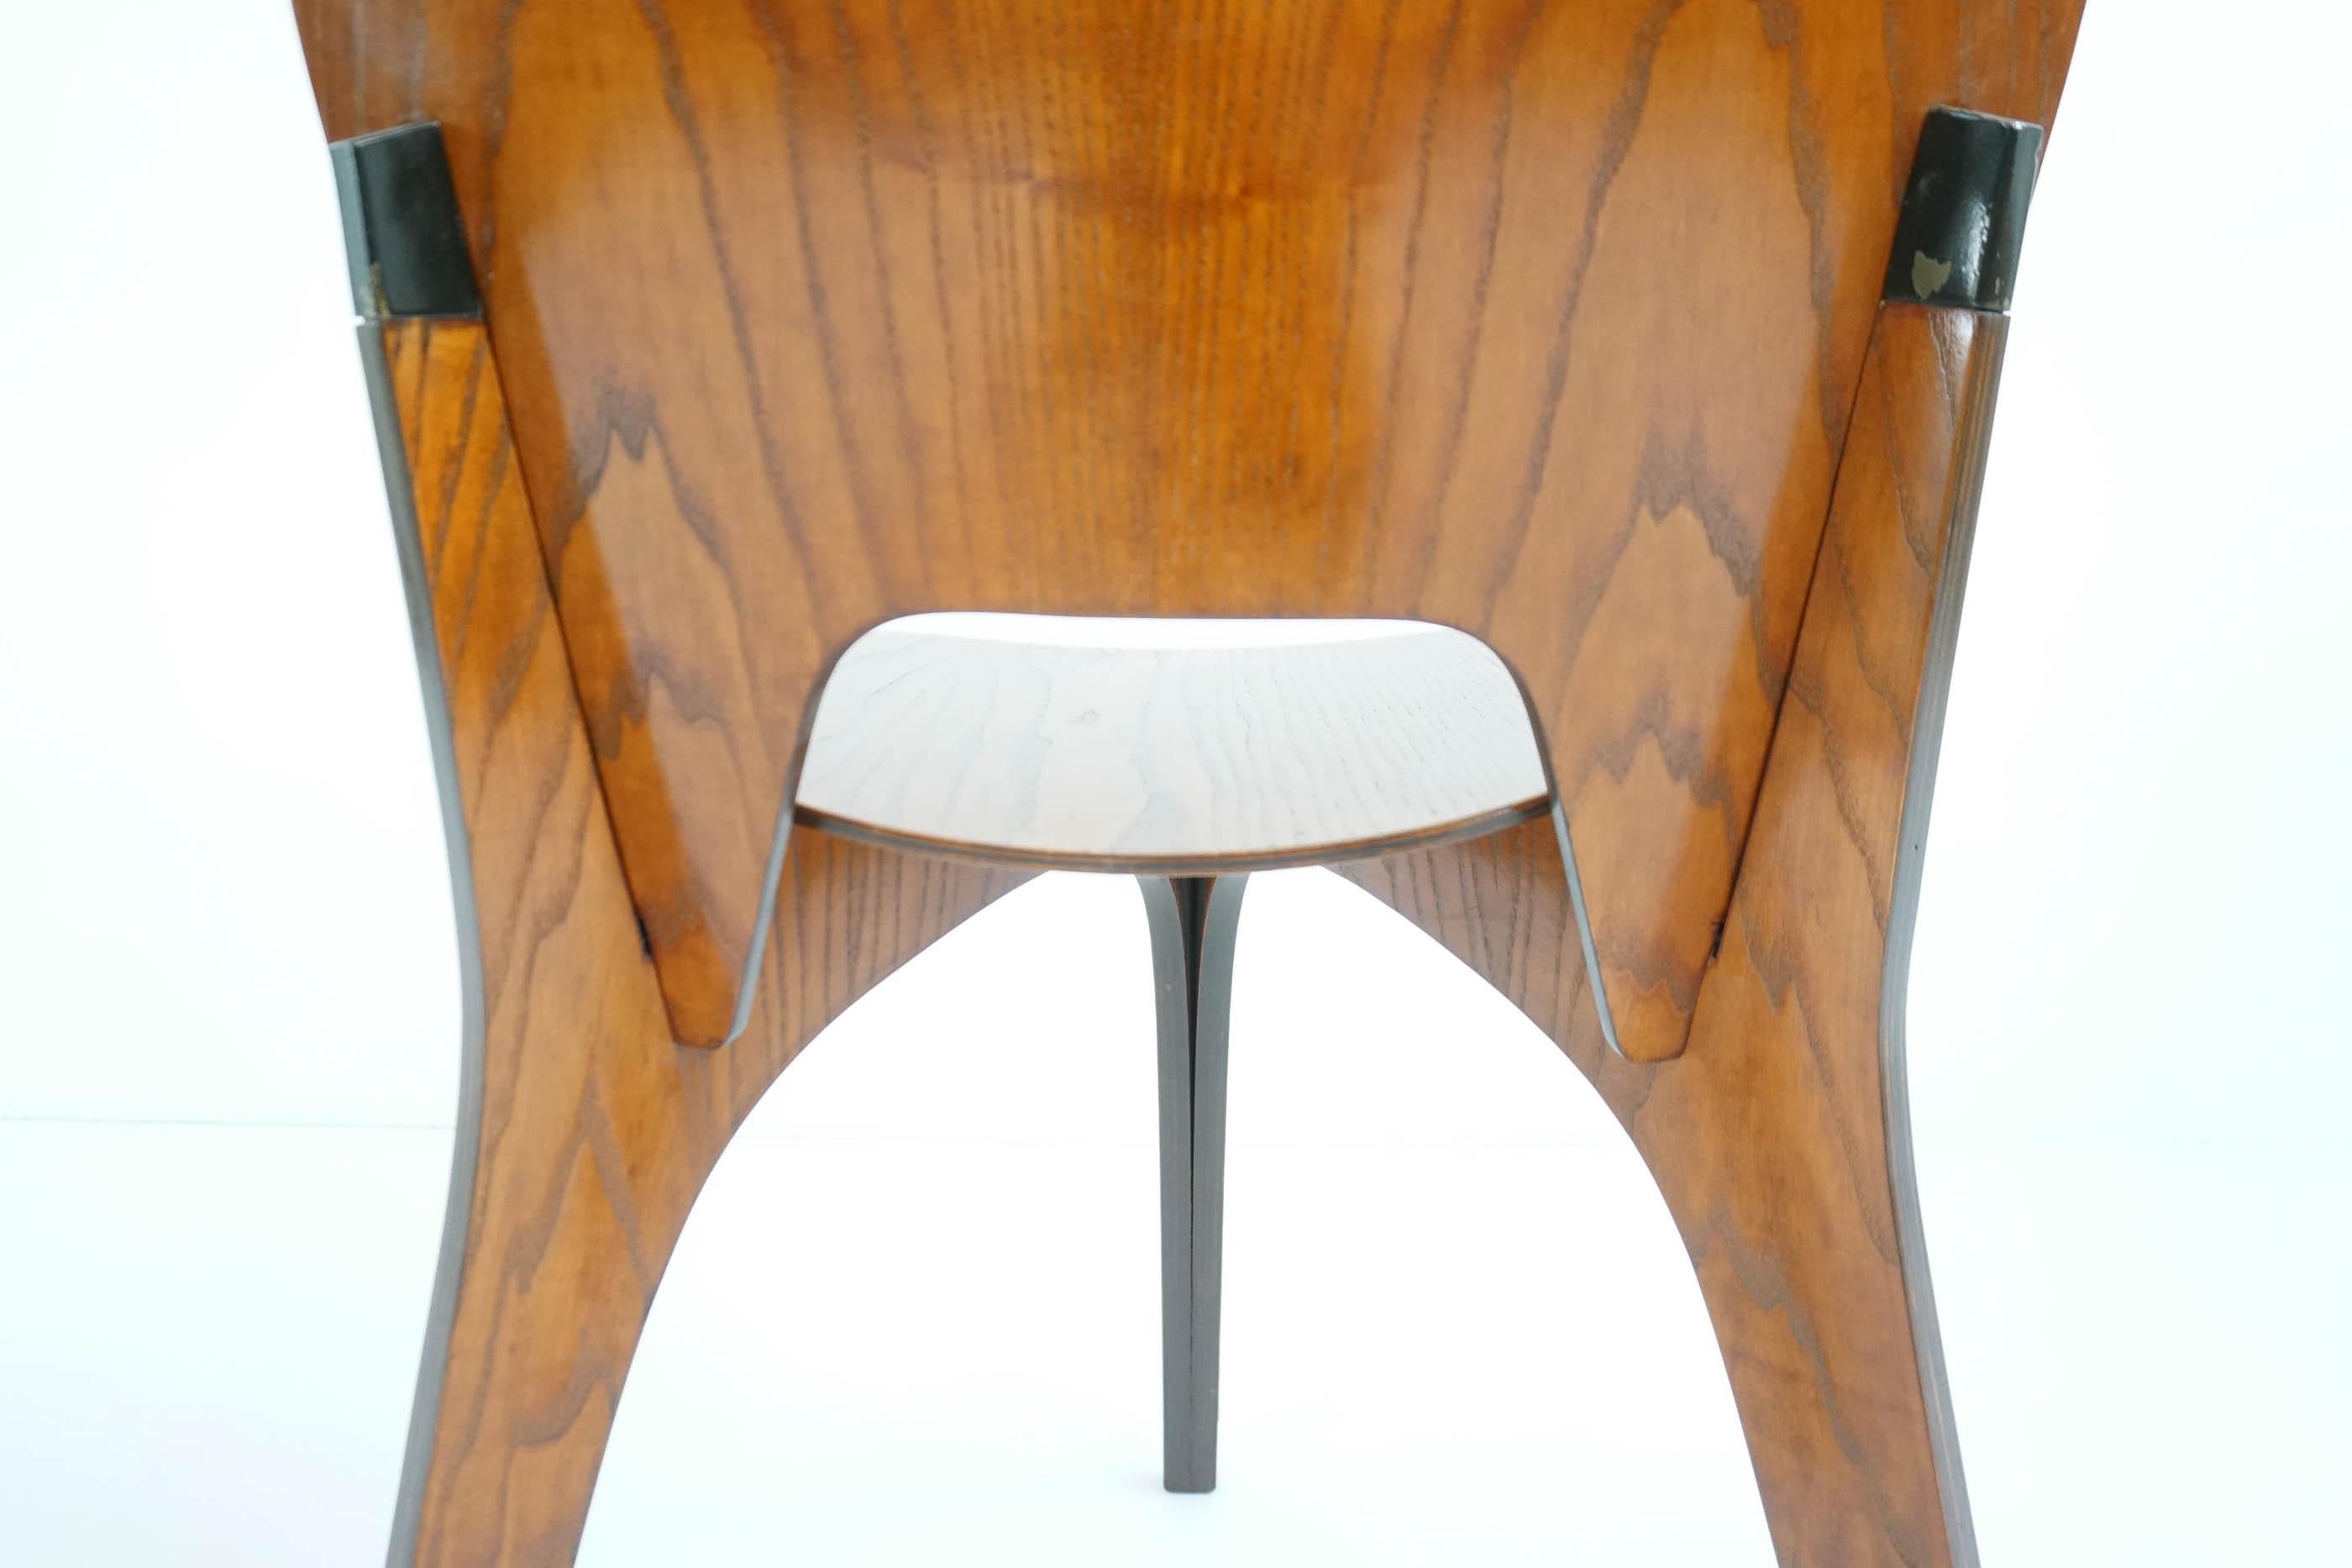 Eugenio Gerli for Tecno, Italy 1959 Iconic and Rare Set of 6 Teak Plywood Chairs For Sale 1